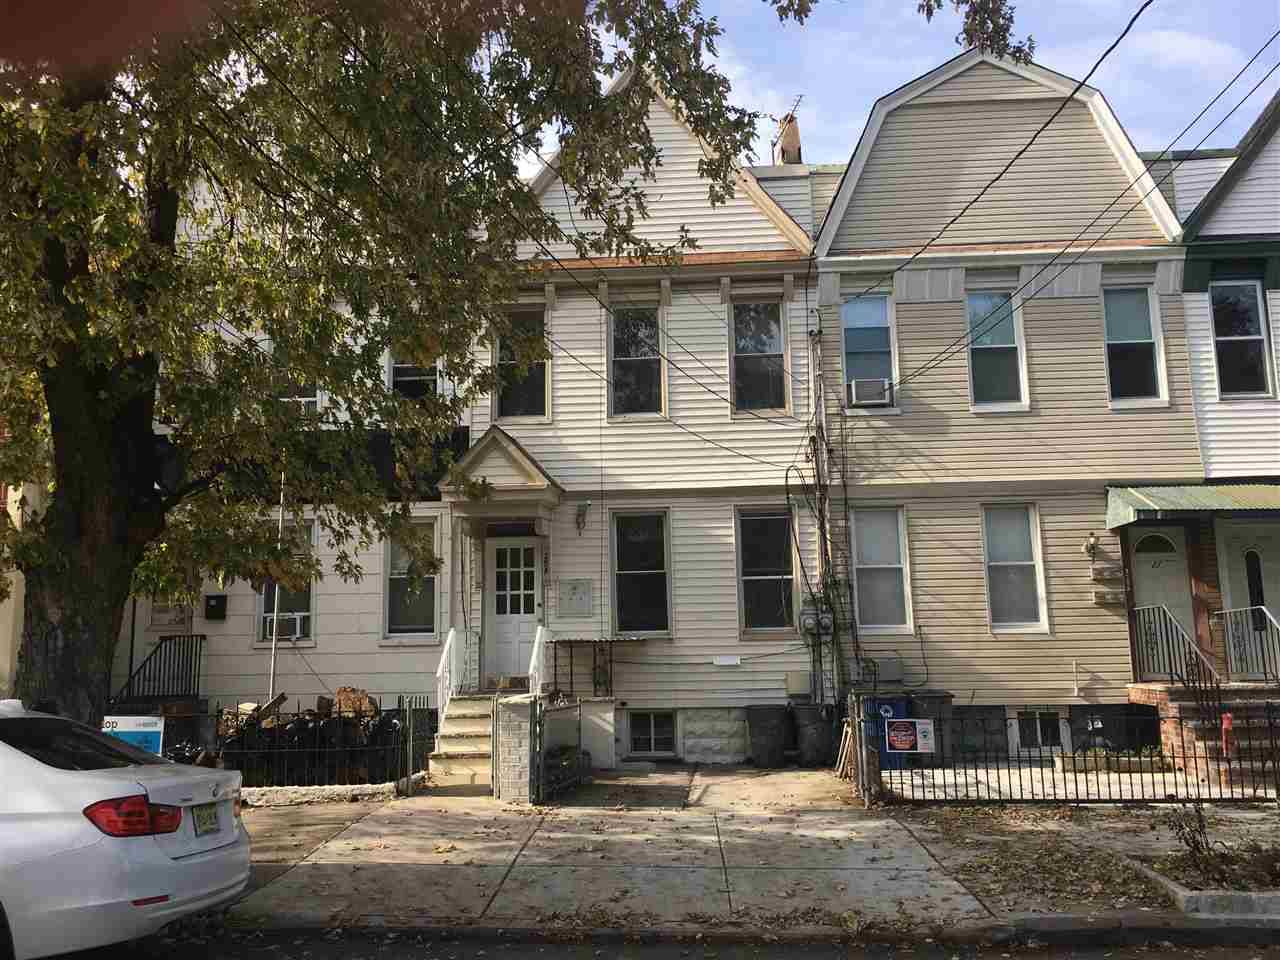 2 FAMILY HOUSE LOCATED AT JERSEY CITY HEIGHTS AREA